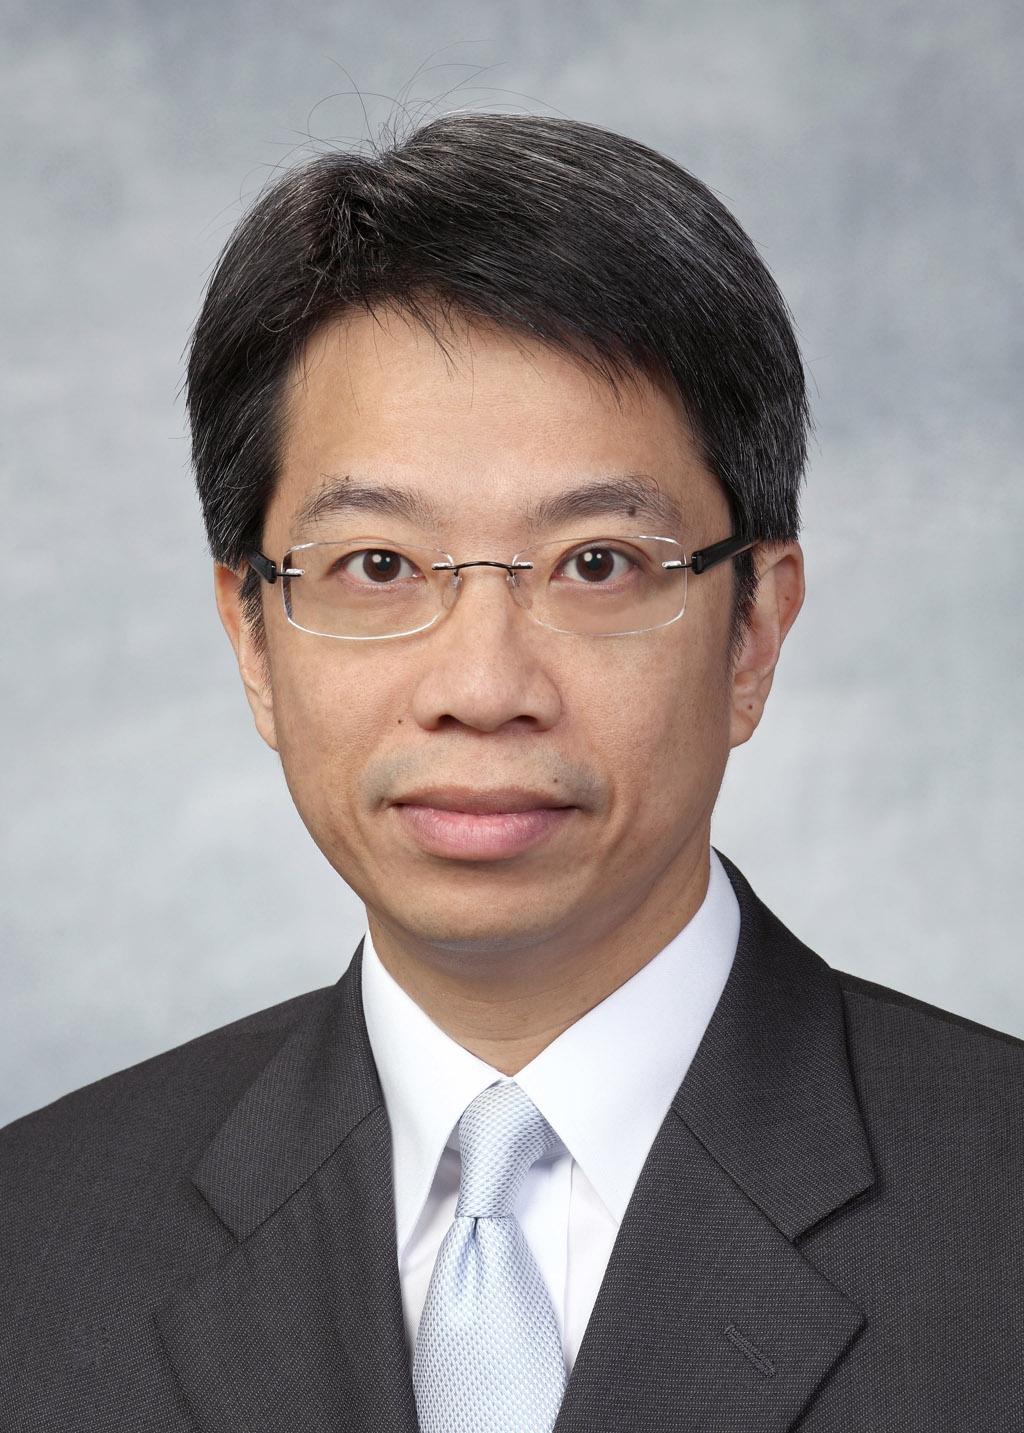 Mr Clement Leung Cheuk-man, Permanent Secretary for Commerce and Economic Development (Communications and Creative Industries), will assume the post of Permanent Secretary for the Civil Service on July 1, 2022.